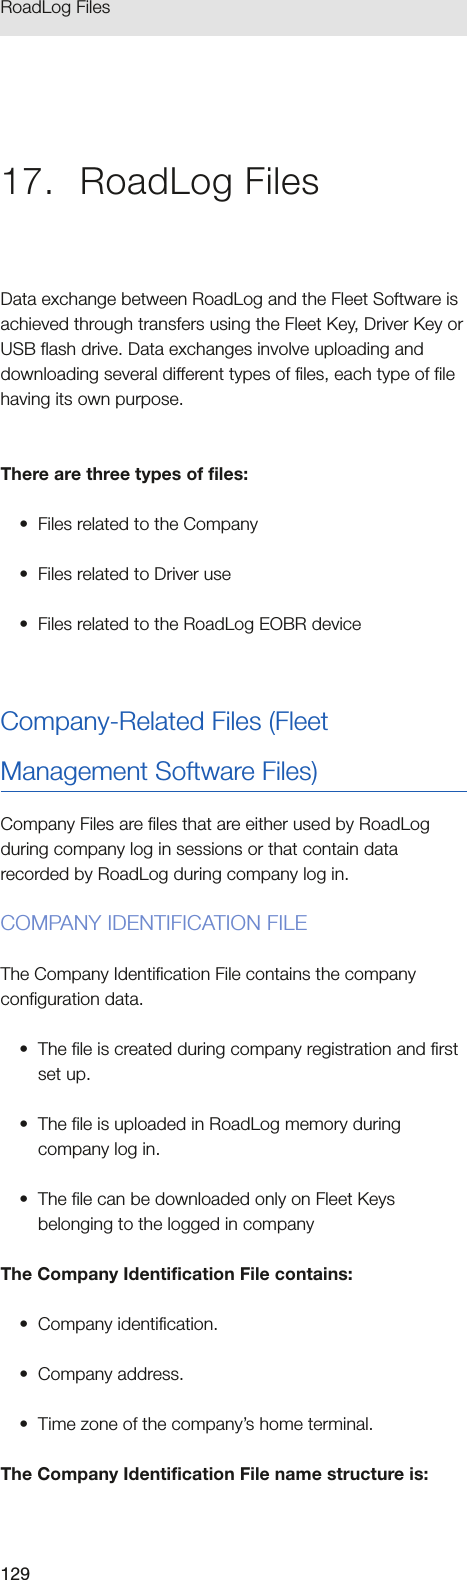 129RoadLog Files 17.  RoadLog FilesData exchange between RoadLog and the Fleet Software is achieved through transfers using the Fleet Key, Driver Key or USB flash drive. Data exchanges involve uploading and downloading several different types of files, each type of file having its own purpose. There are three types of files:•  Files related to the Company•  Files related to Driver use•  Files related to the RoadLog EOBR deviceCompany-Related Files (Fleet Management Software Files)Company Files are files that are either used by RoadLog during company log in sessions or that contain data recorded by RoadLog during company log in.COMPANY IDENTIFICATION FILEThe Company Identification File contains the company configuration data.•  The file is created during company registration and first set up.•  The file is uploaded in RoadLog memory during company log in.•  The file can be downloaded only on Fleet Keys belonging to the logged in companyThe Company Identification File contains:•  Company identification.•  Company address.•  Time zone of the company’s home terminal.The Company Identification File name structure is: